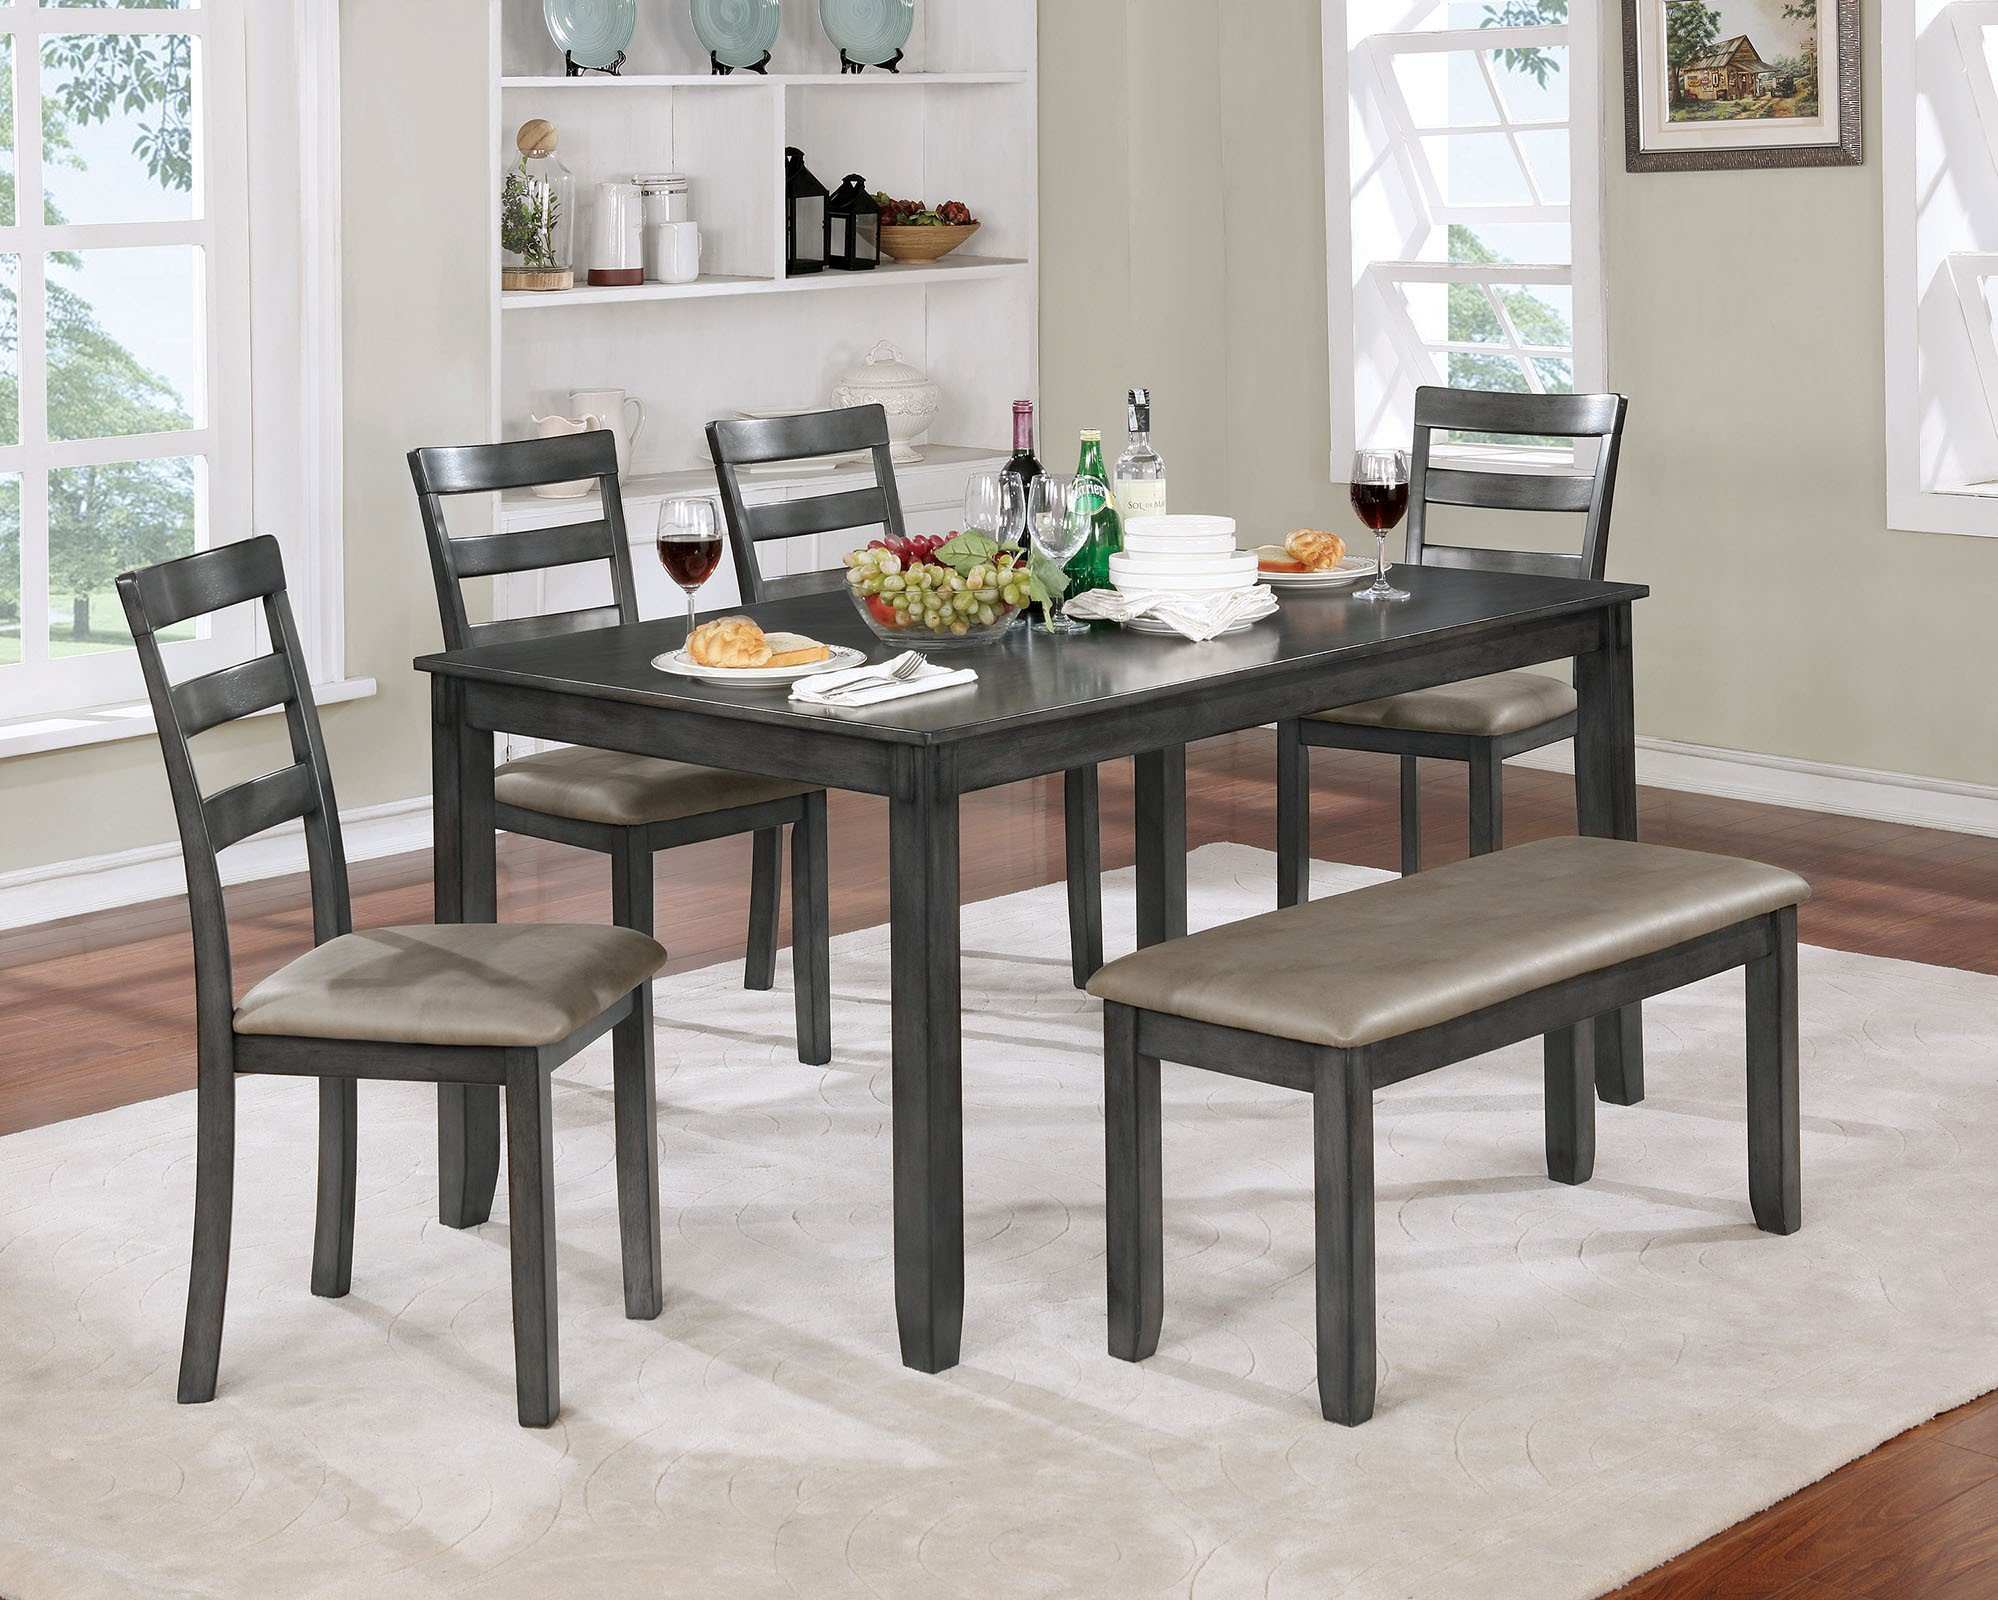 Dining Room Tables Jordans Elegant Gloria 6 Pc Dining Table with regard to size 1998 X 1600